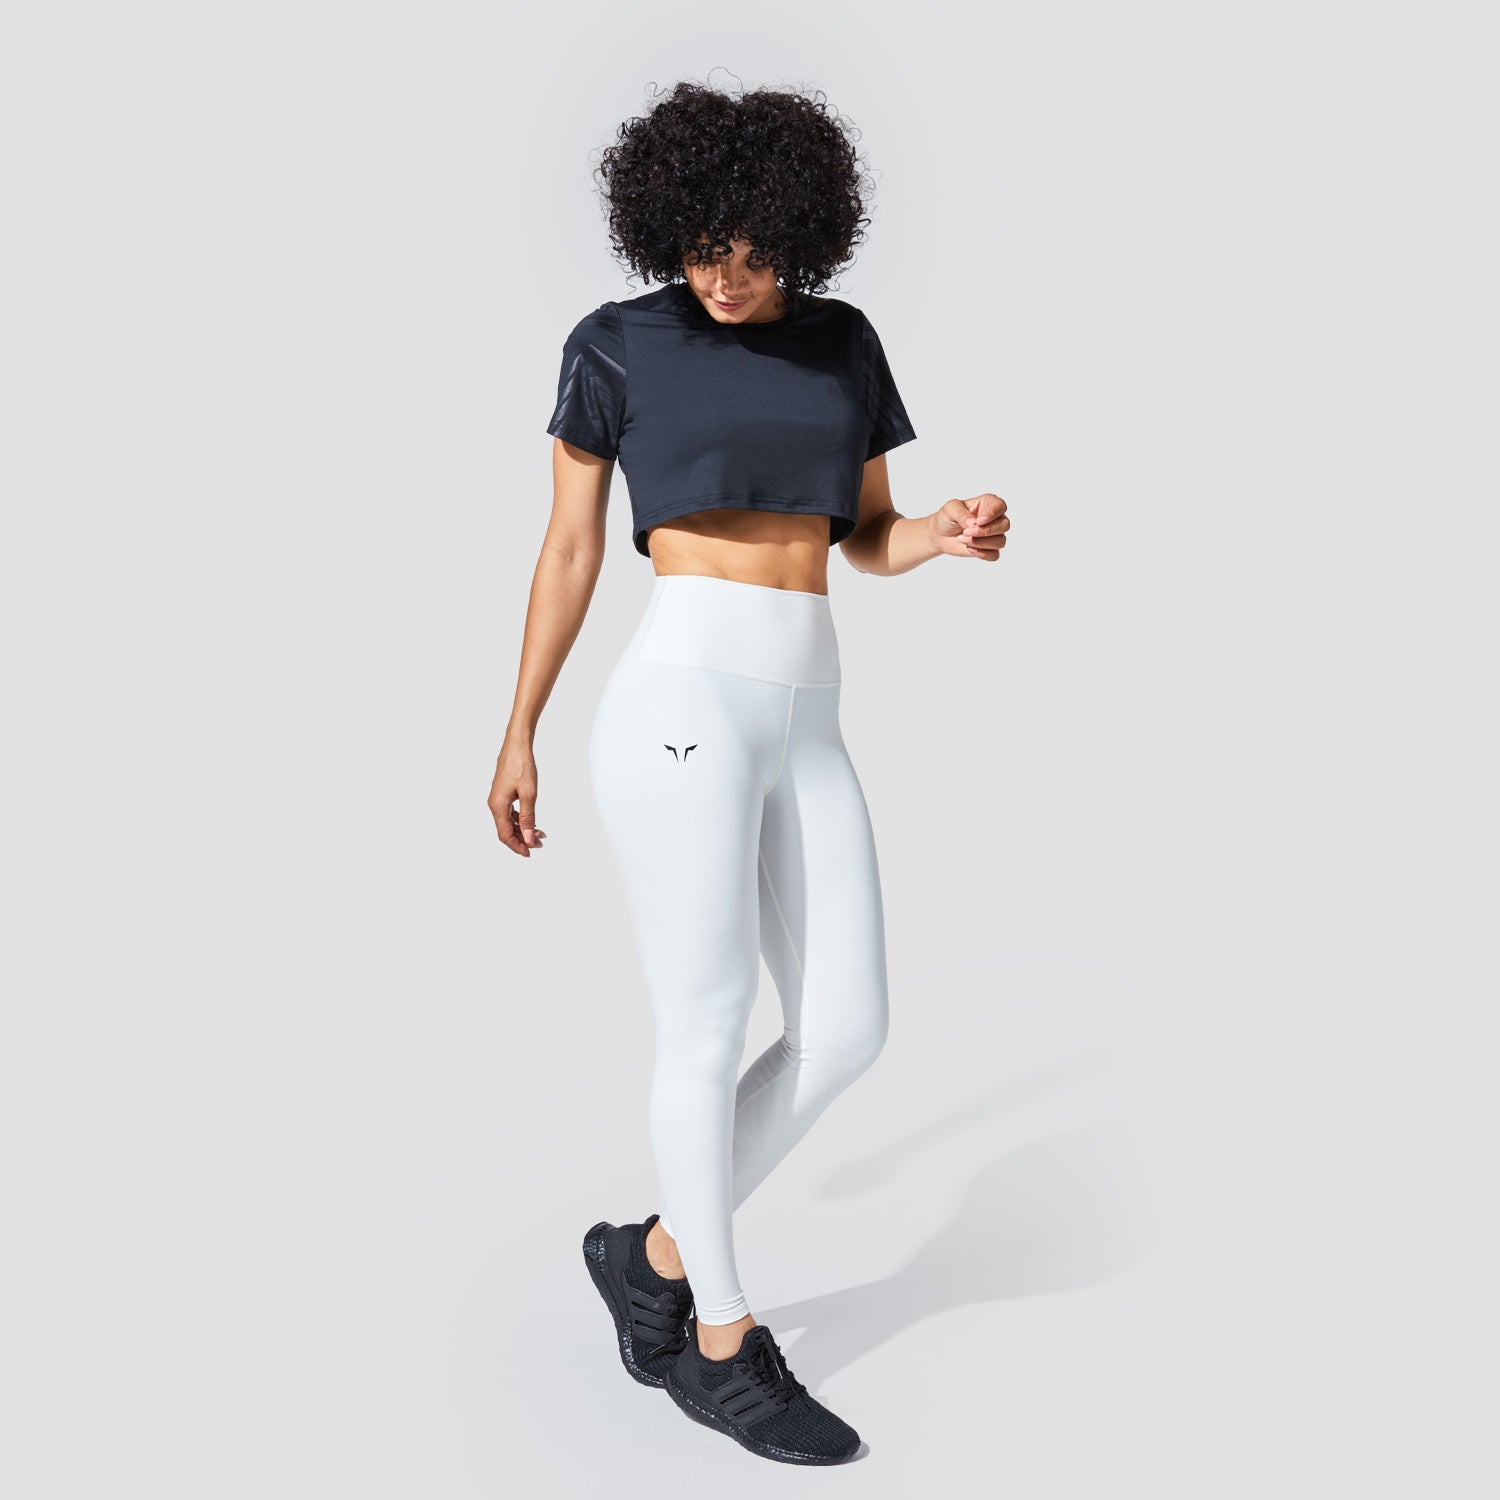 squatwolf-workout-clothes-graphic-wave-eyes-leggins-white-gym-leggings-for-women